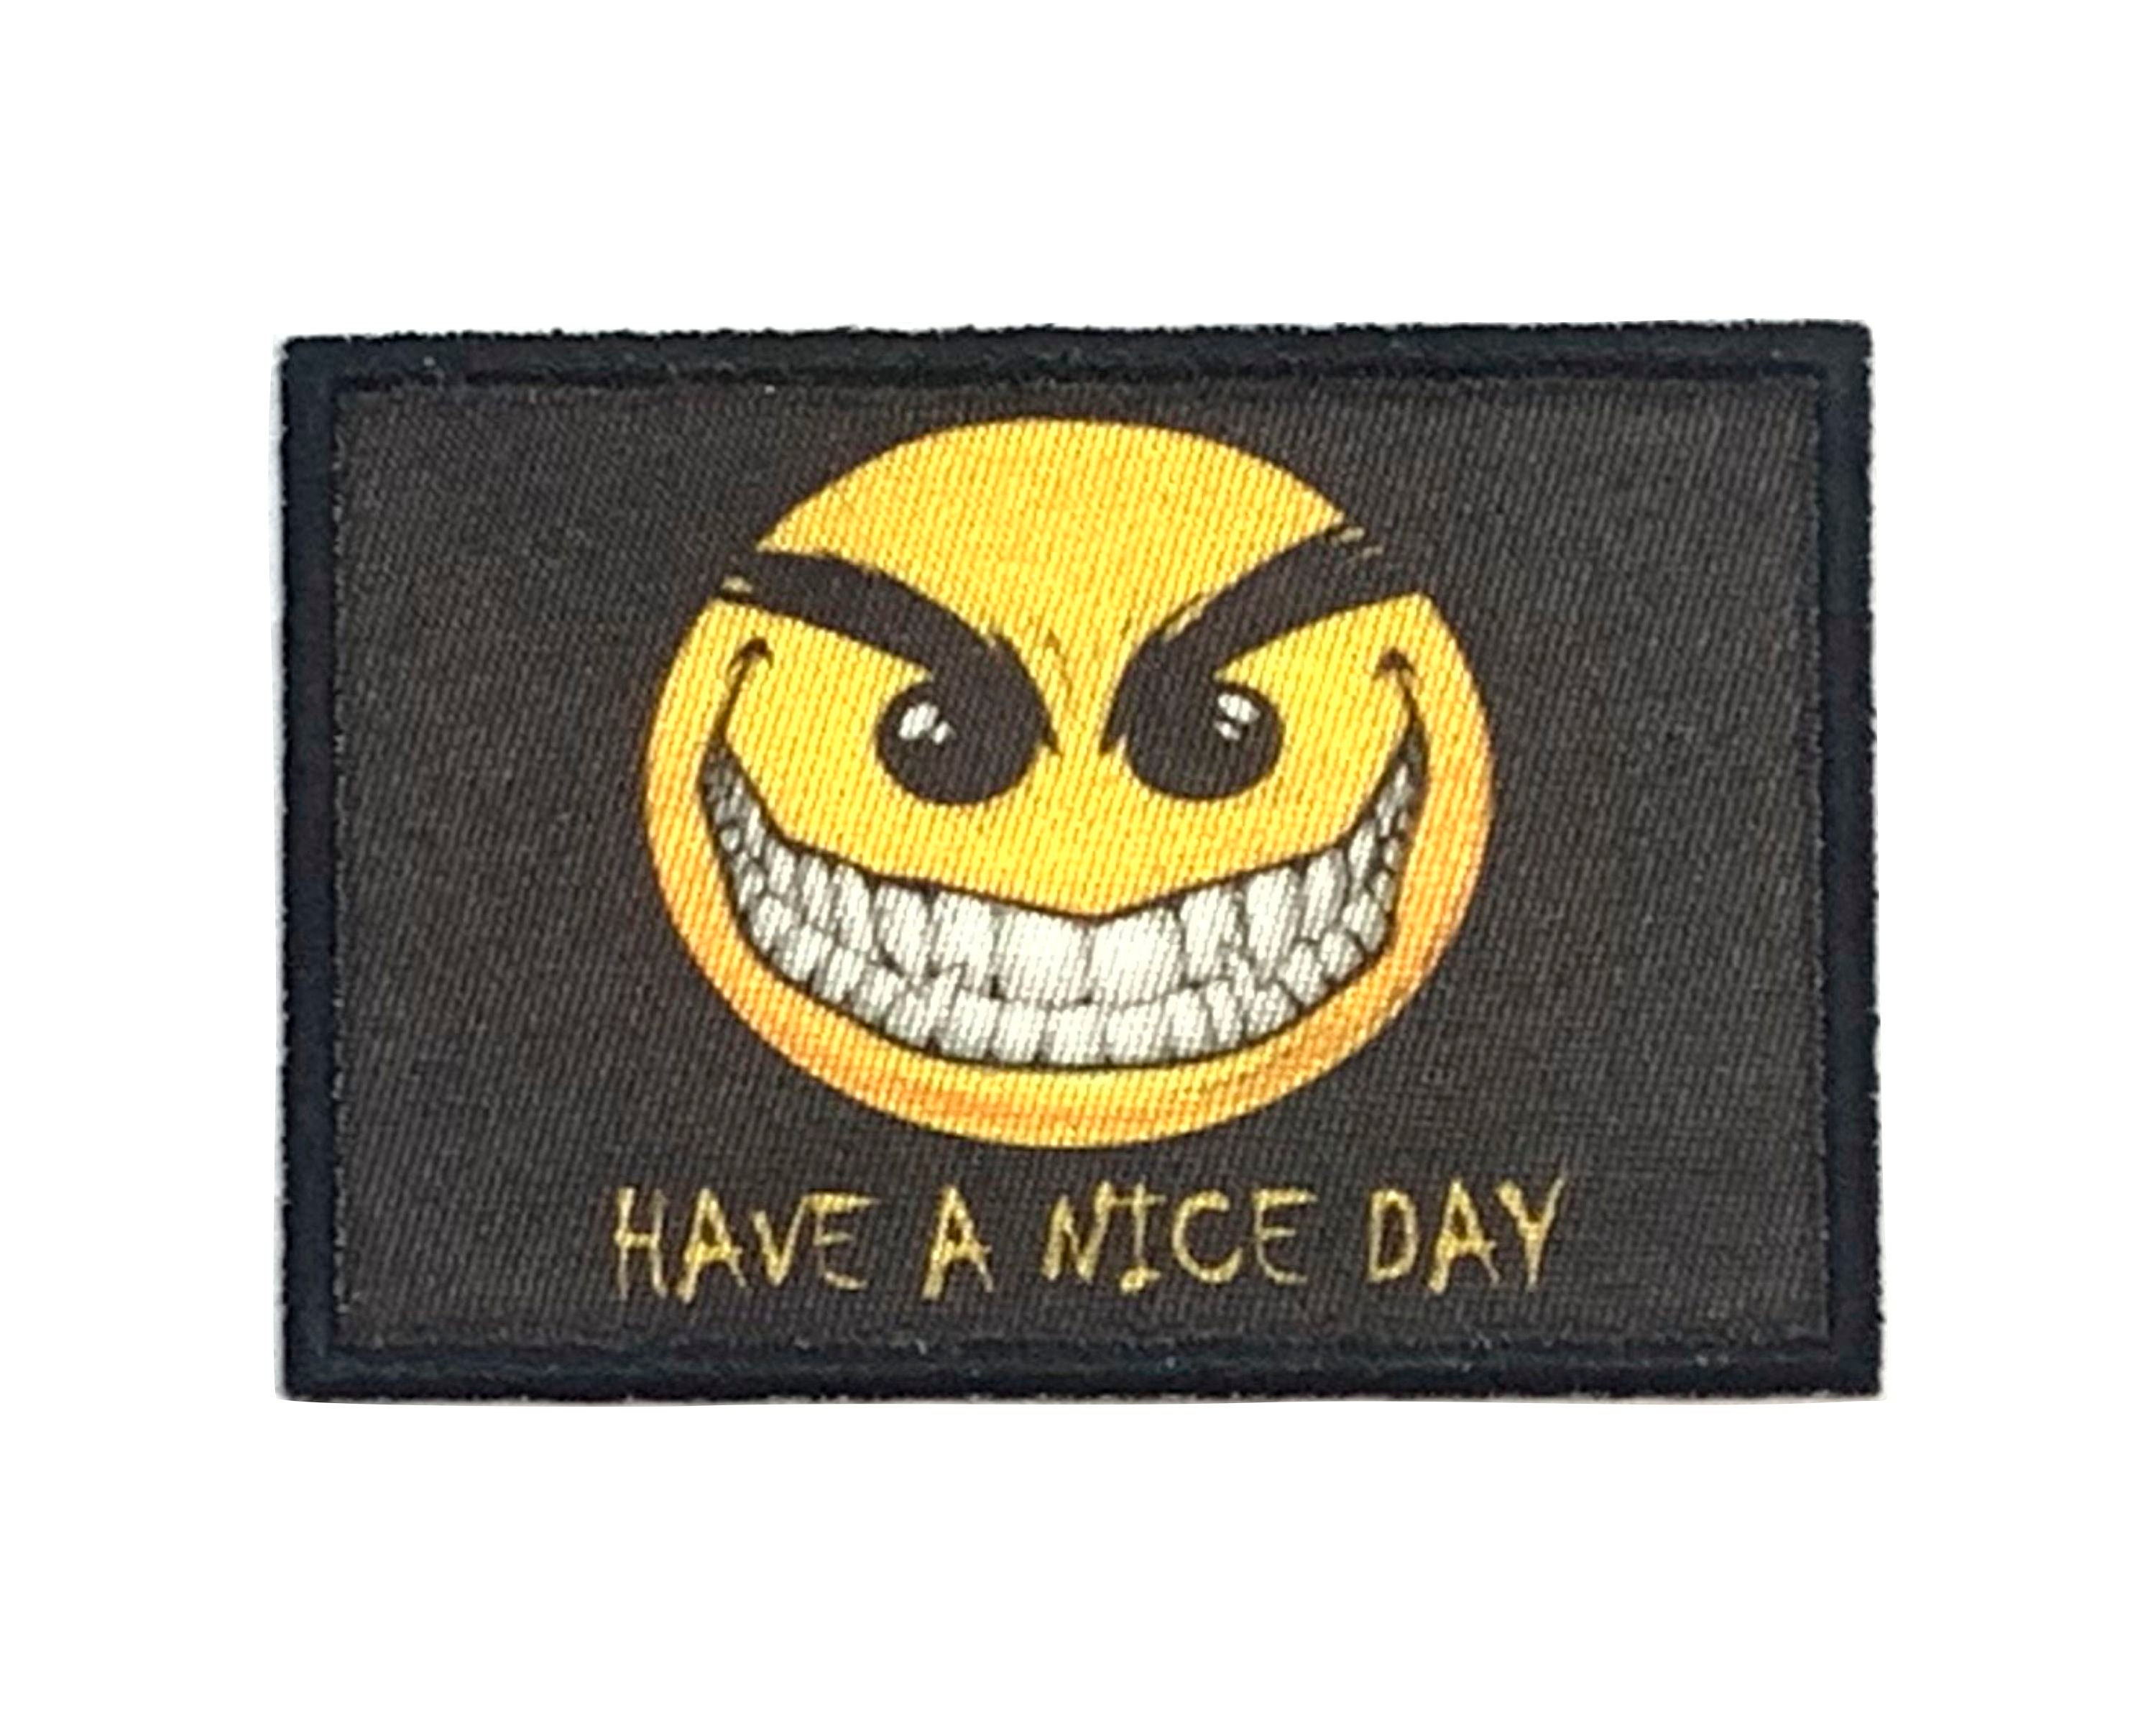 1 Smiley Faces Iron On Patches 3ct by hildie & jo